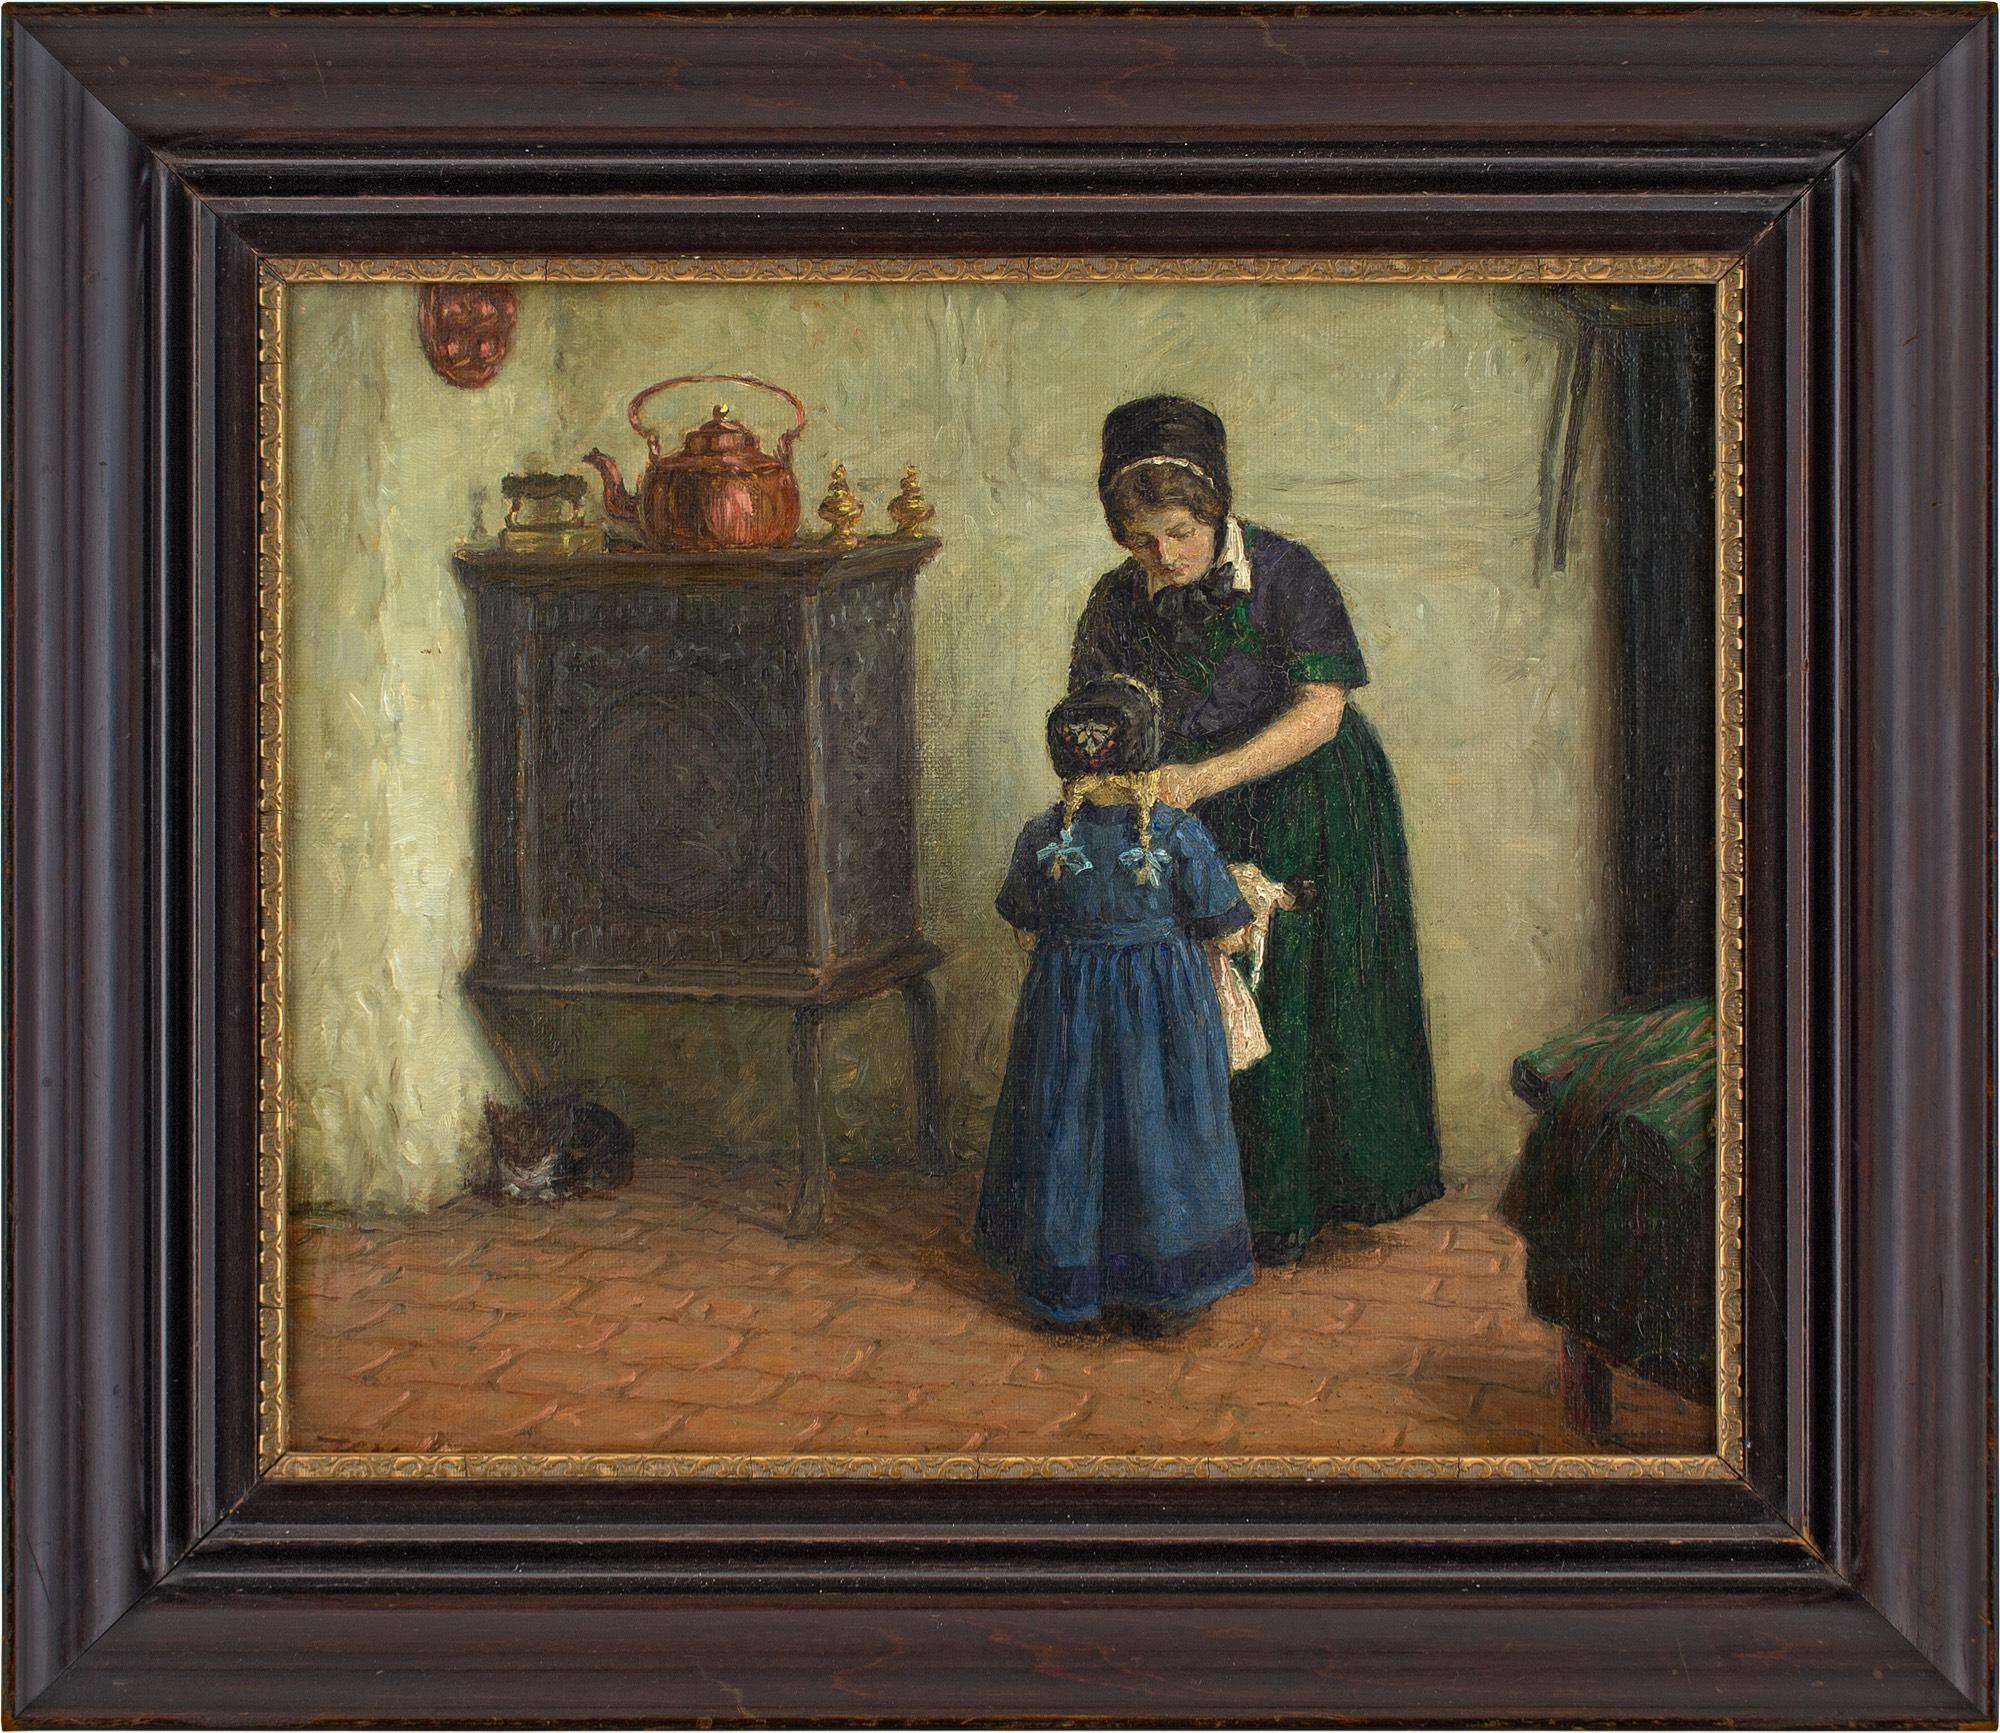 This charming early 20th-century oil painting by Danish artist Valdemar Magaard (1864-1937) depicts a mother and child within a rustic stone cottage.

Reaching down, she ties her daughter’s bonnet. Both are wearing their Sunday best. Perhaps it’s